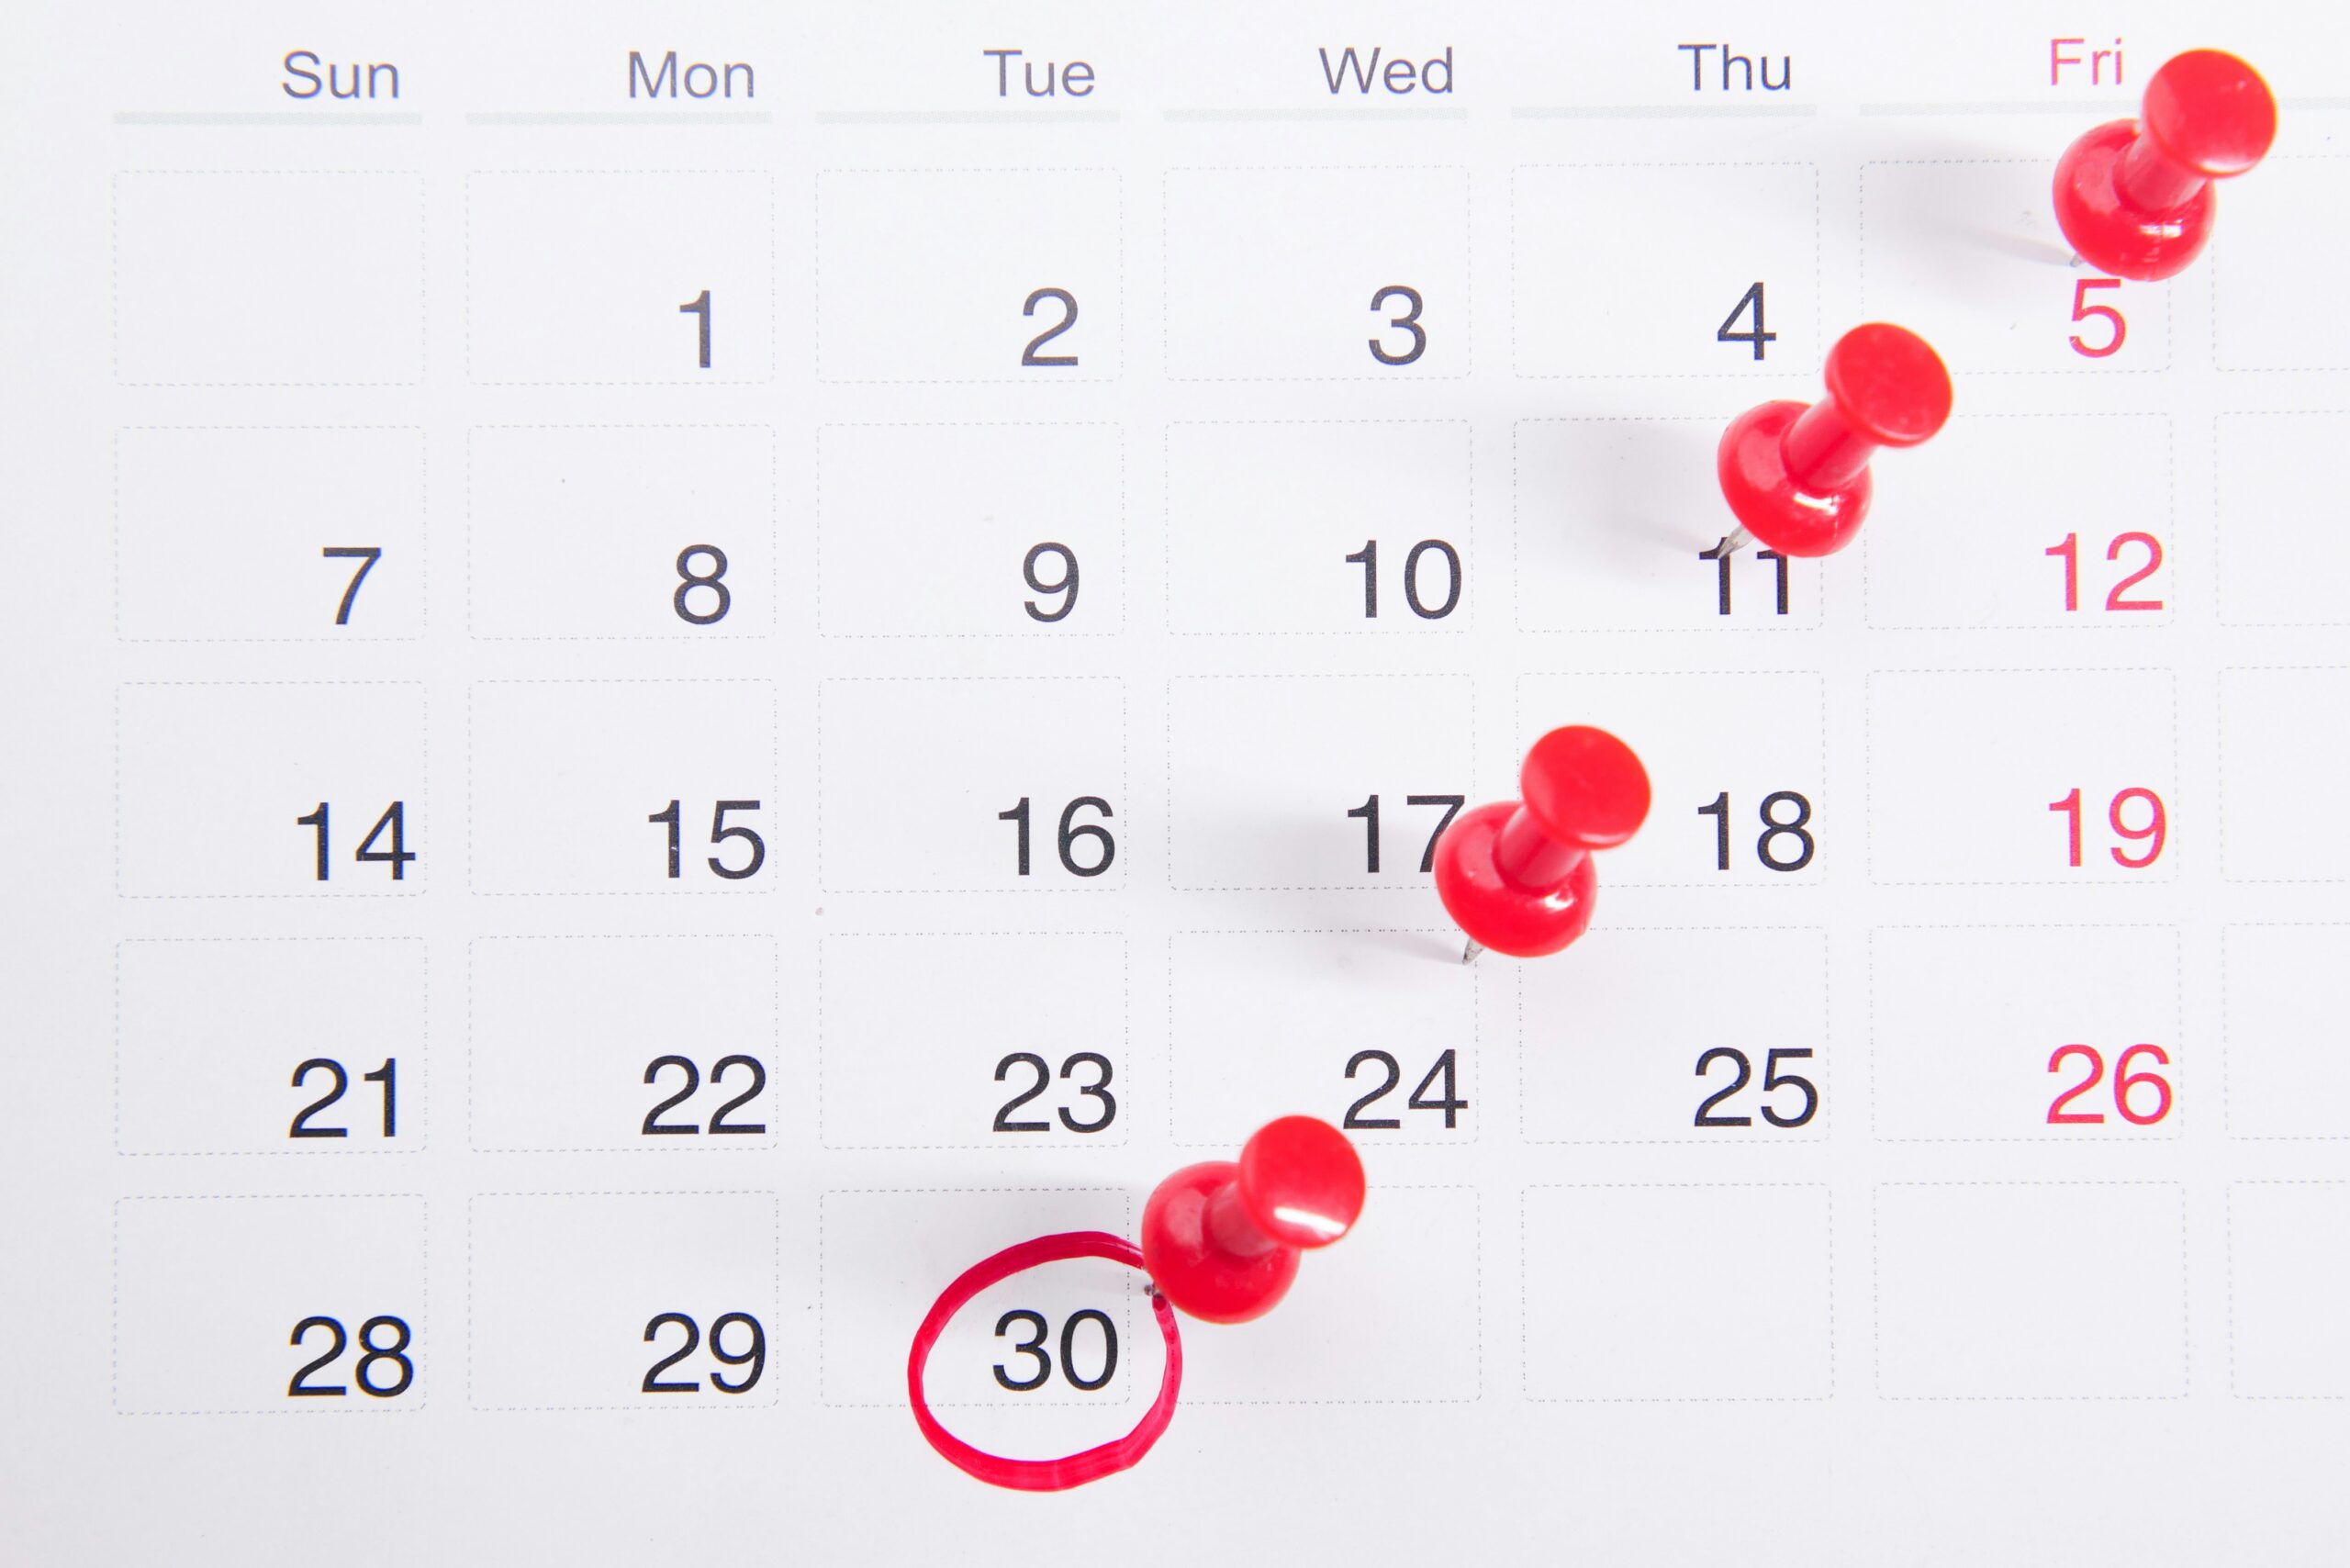 Calendar with red push pins in it. Tuesday the 30th is circled in red. 